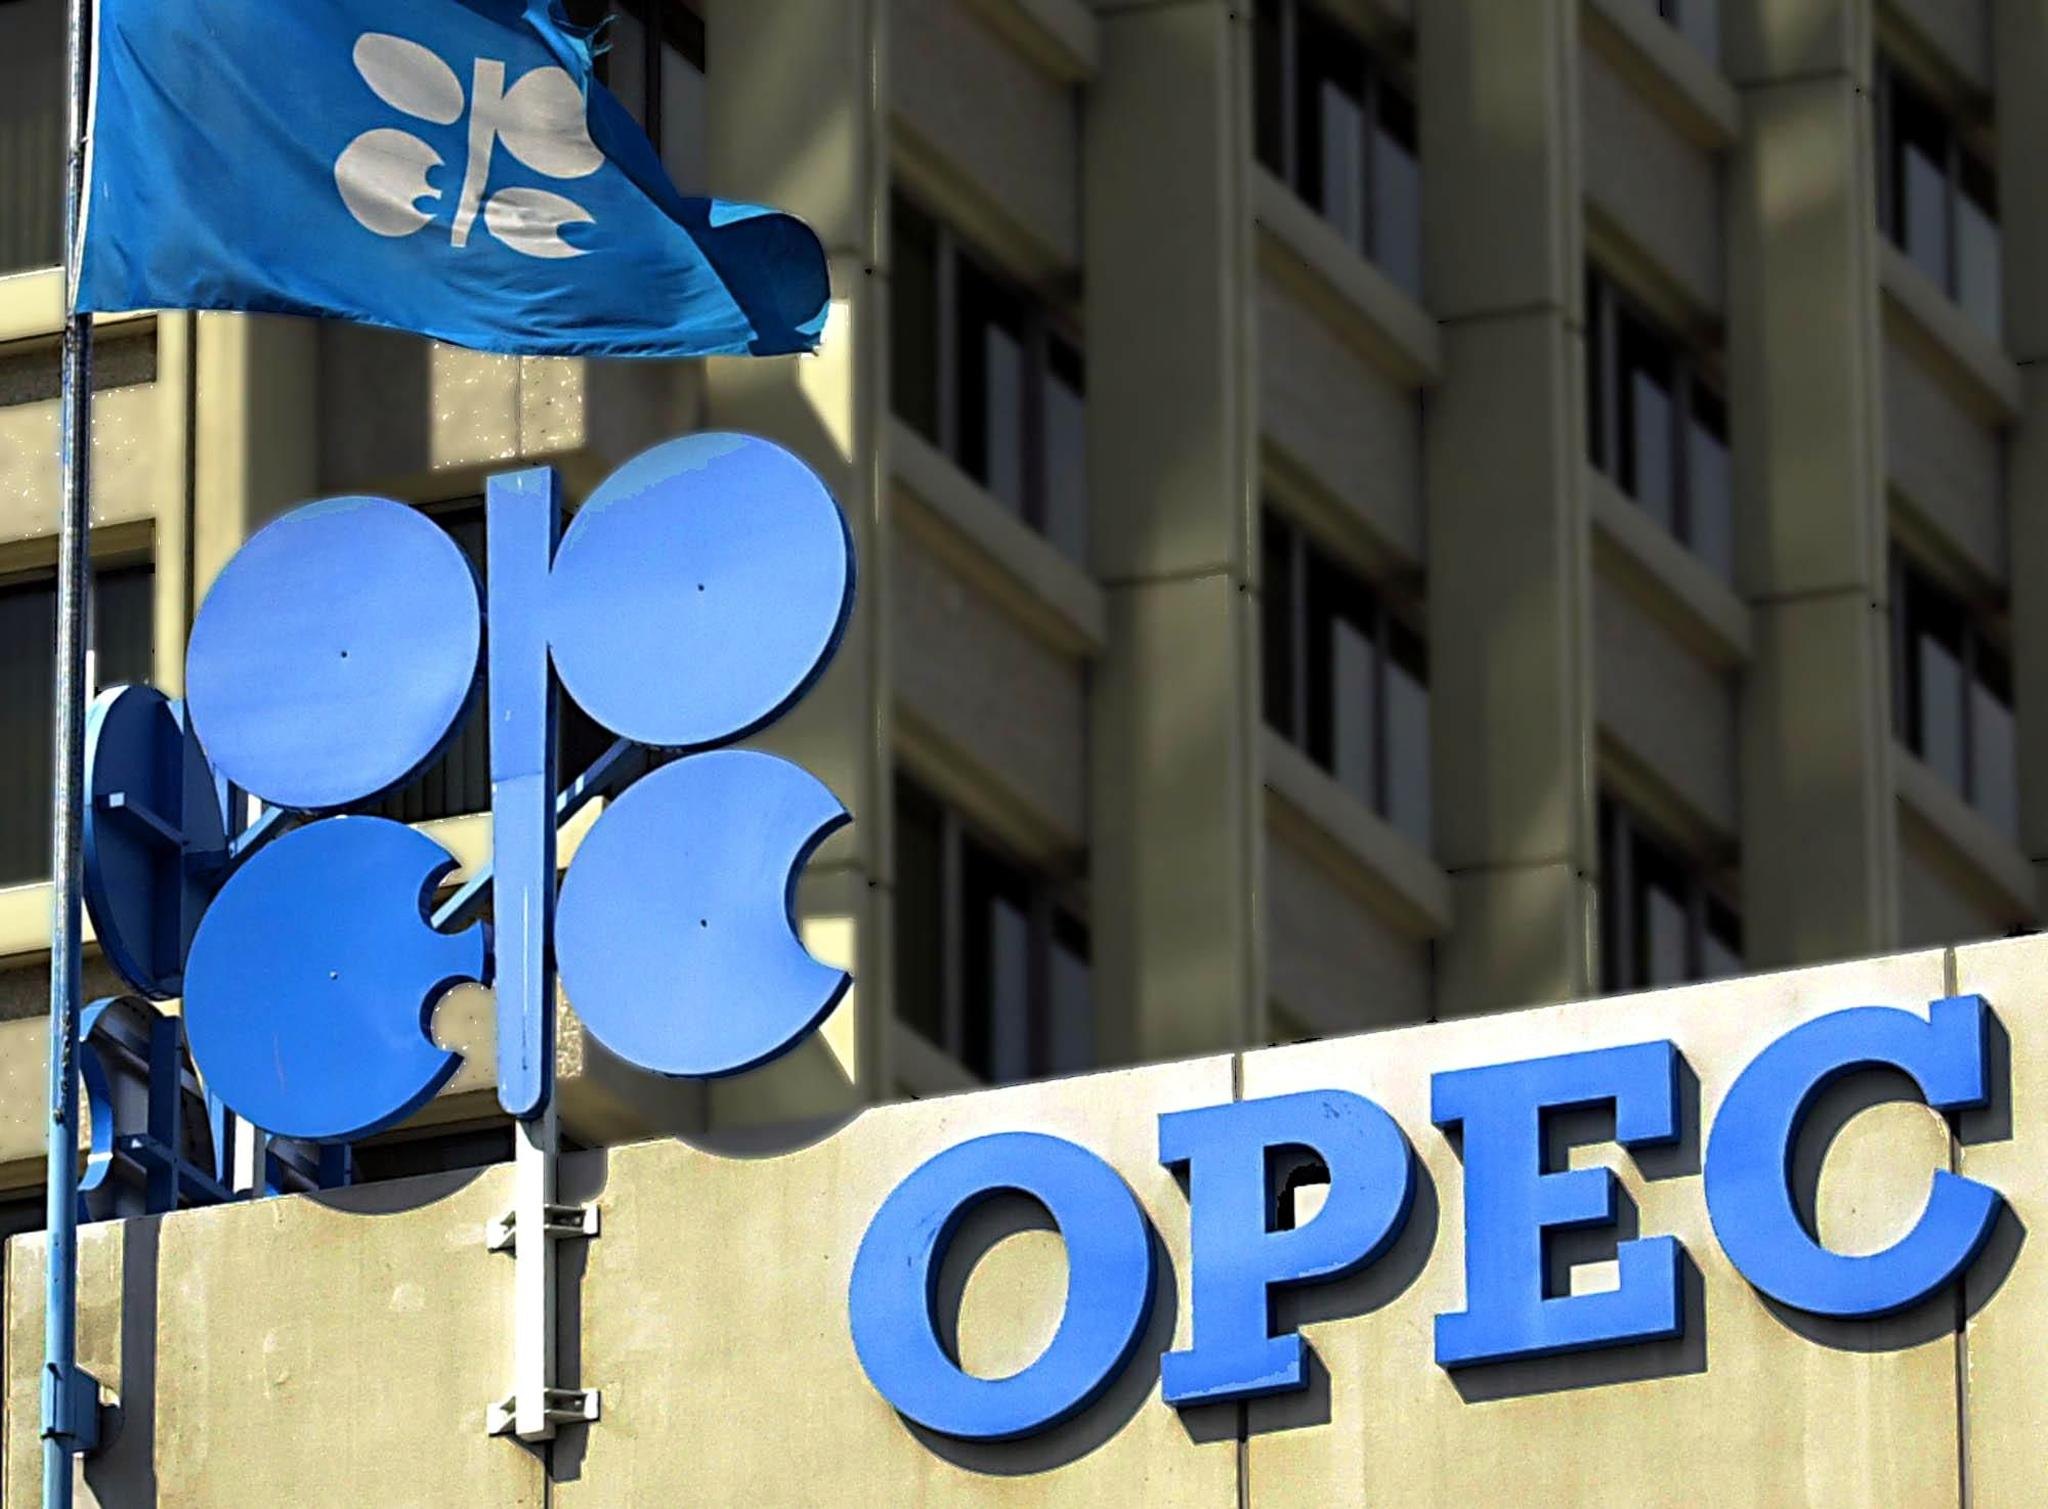 OPEC Says Iraqi Oil Facilities Secure, Production Continuing